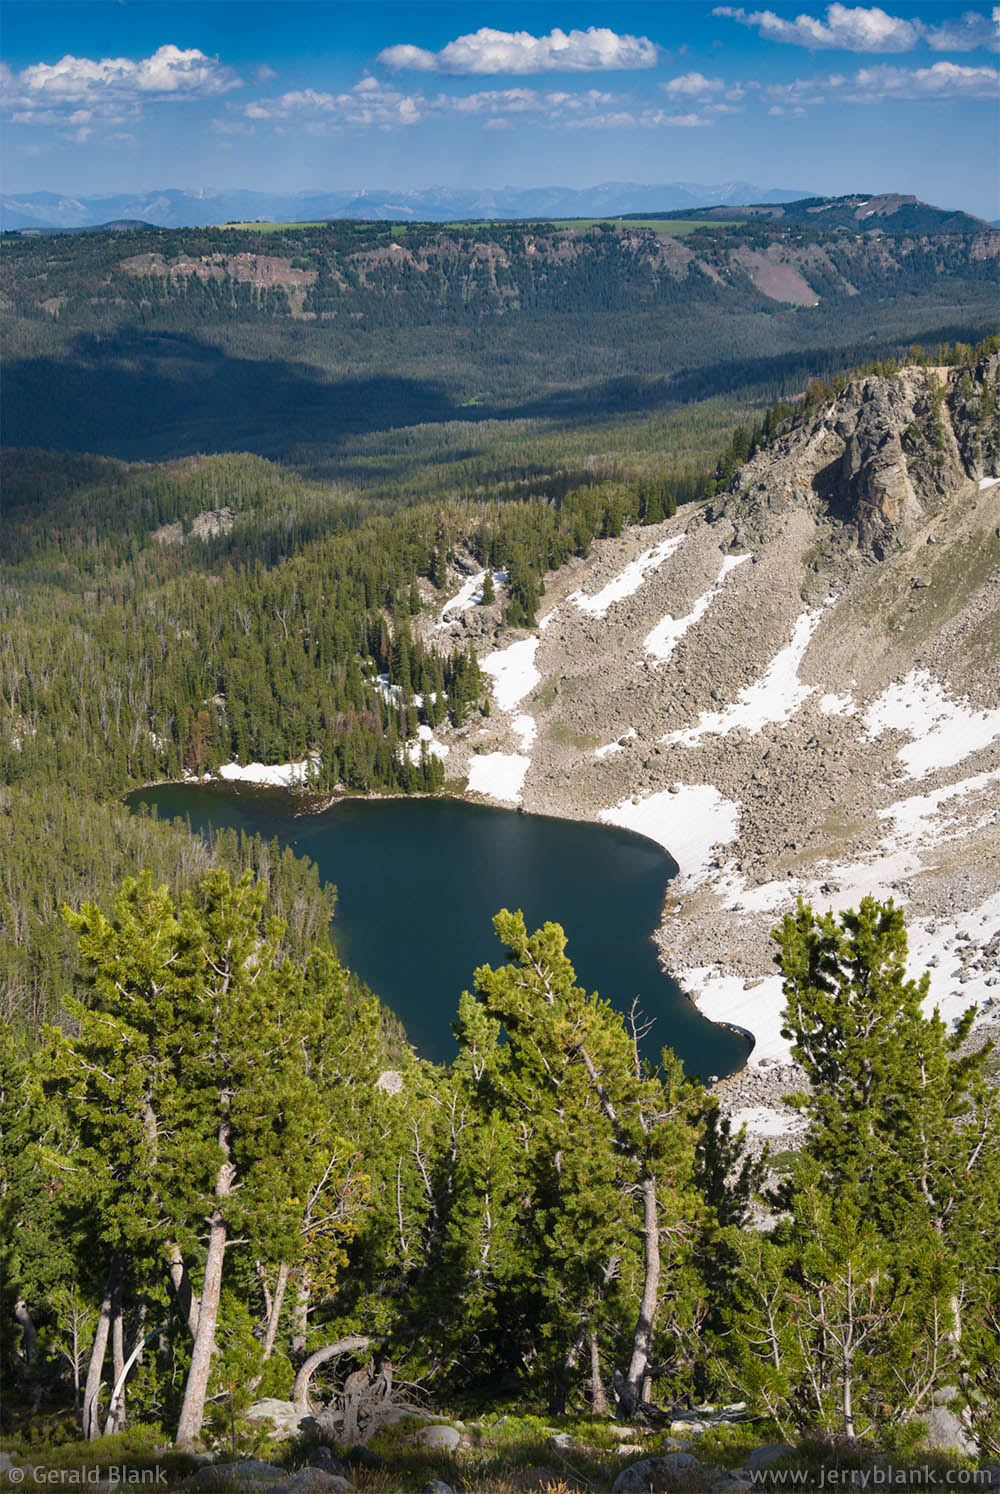 05559 - Hidden Lake in Montana’s Custer Gallatin National Forest, located at the north end of the Gallatin Range - photo by Jerry Blank